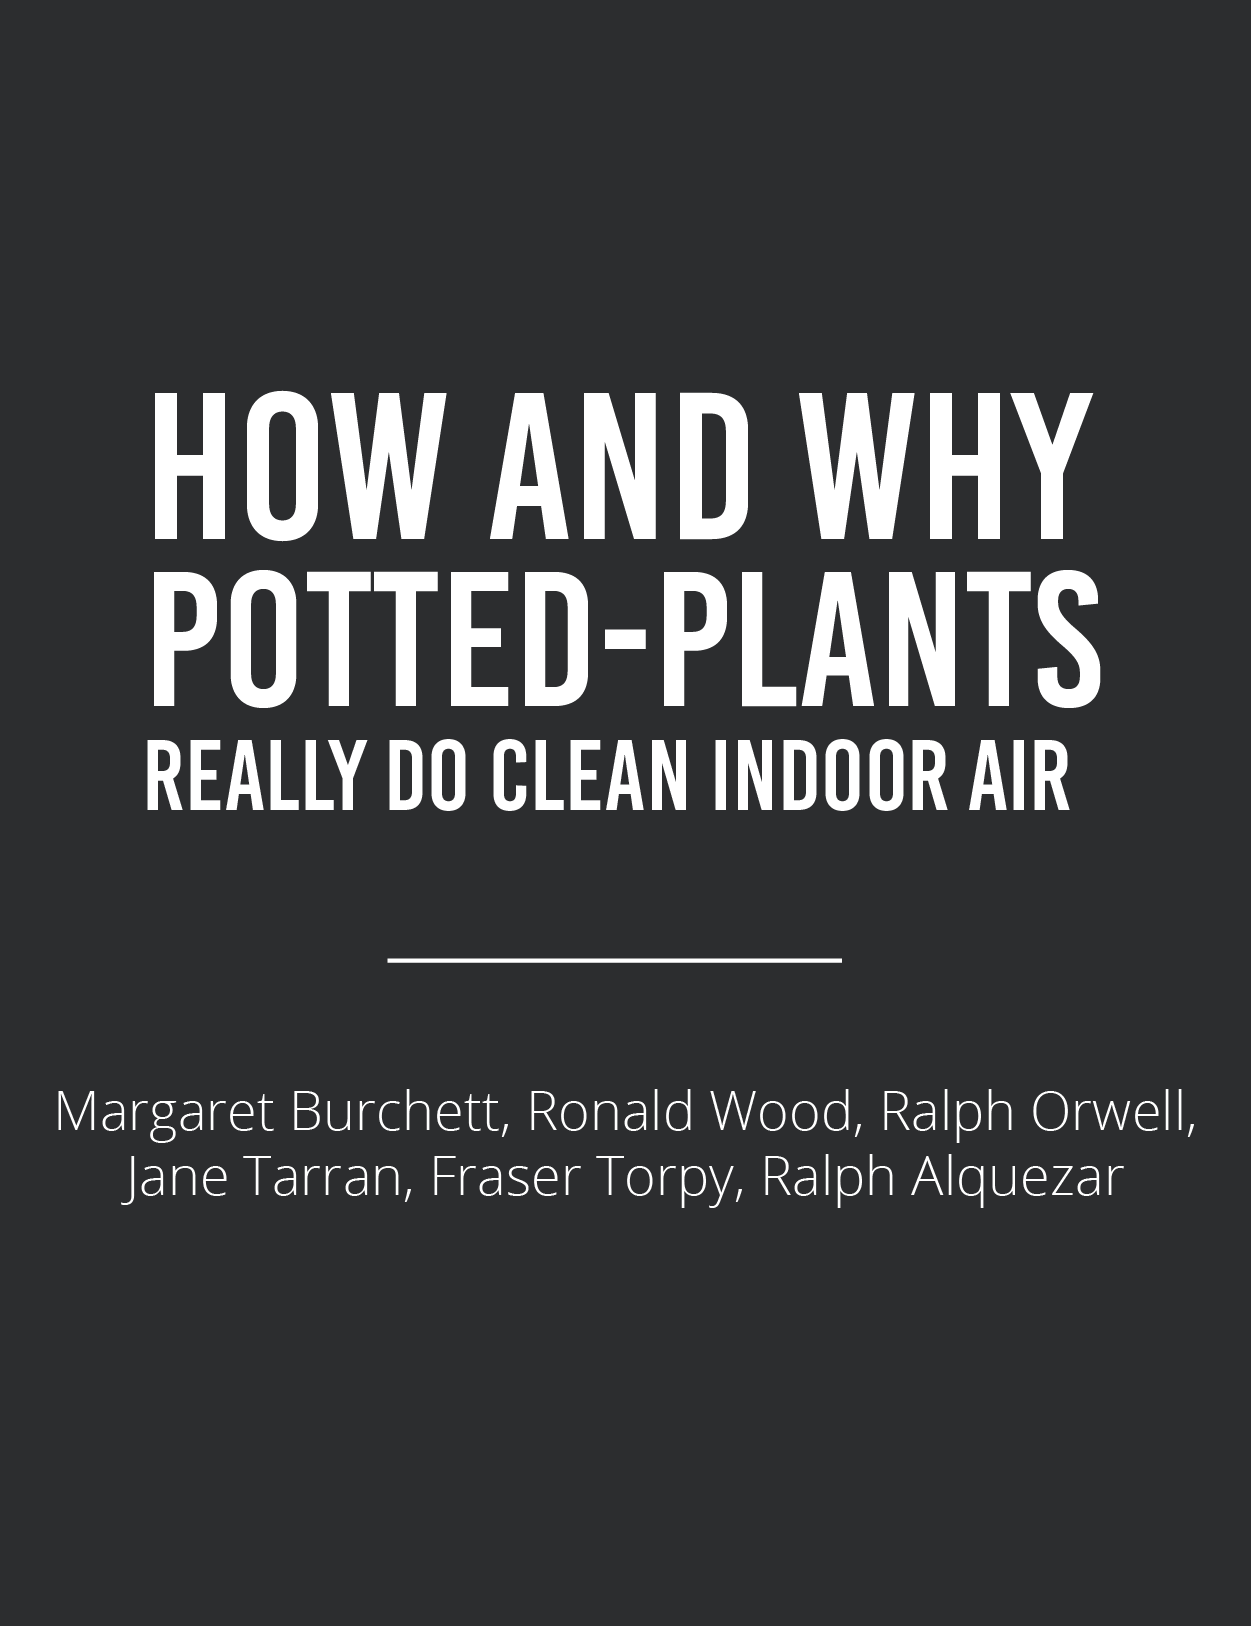 How & Why Potted Plants Clean Indoor AirFeatured Image